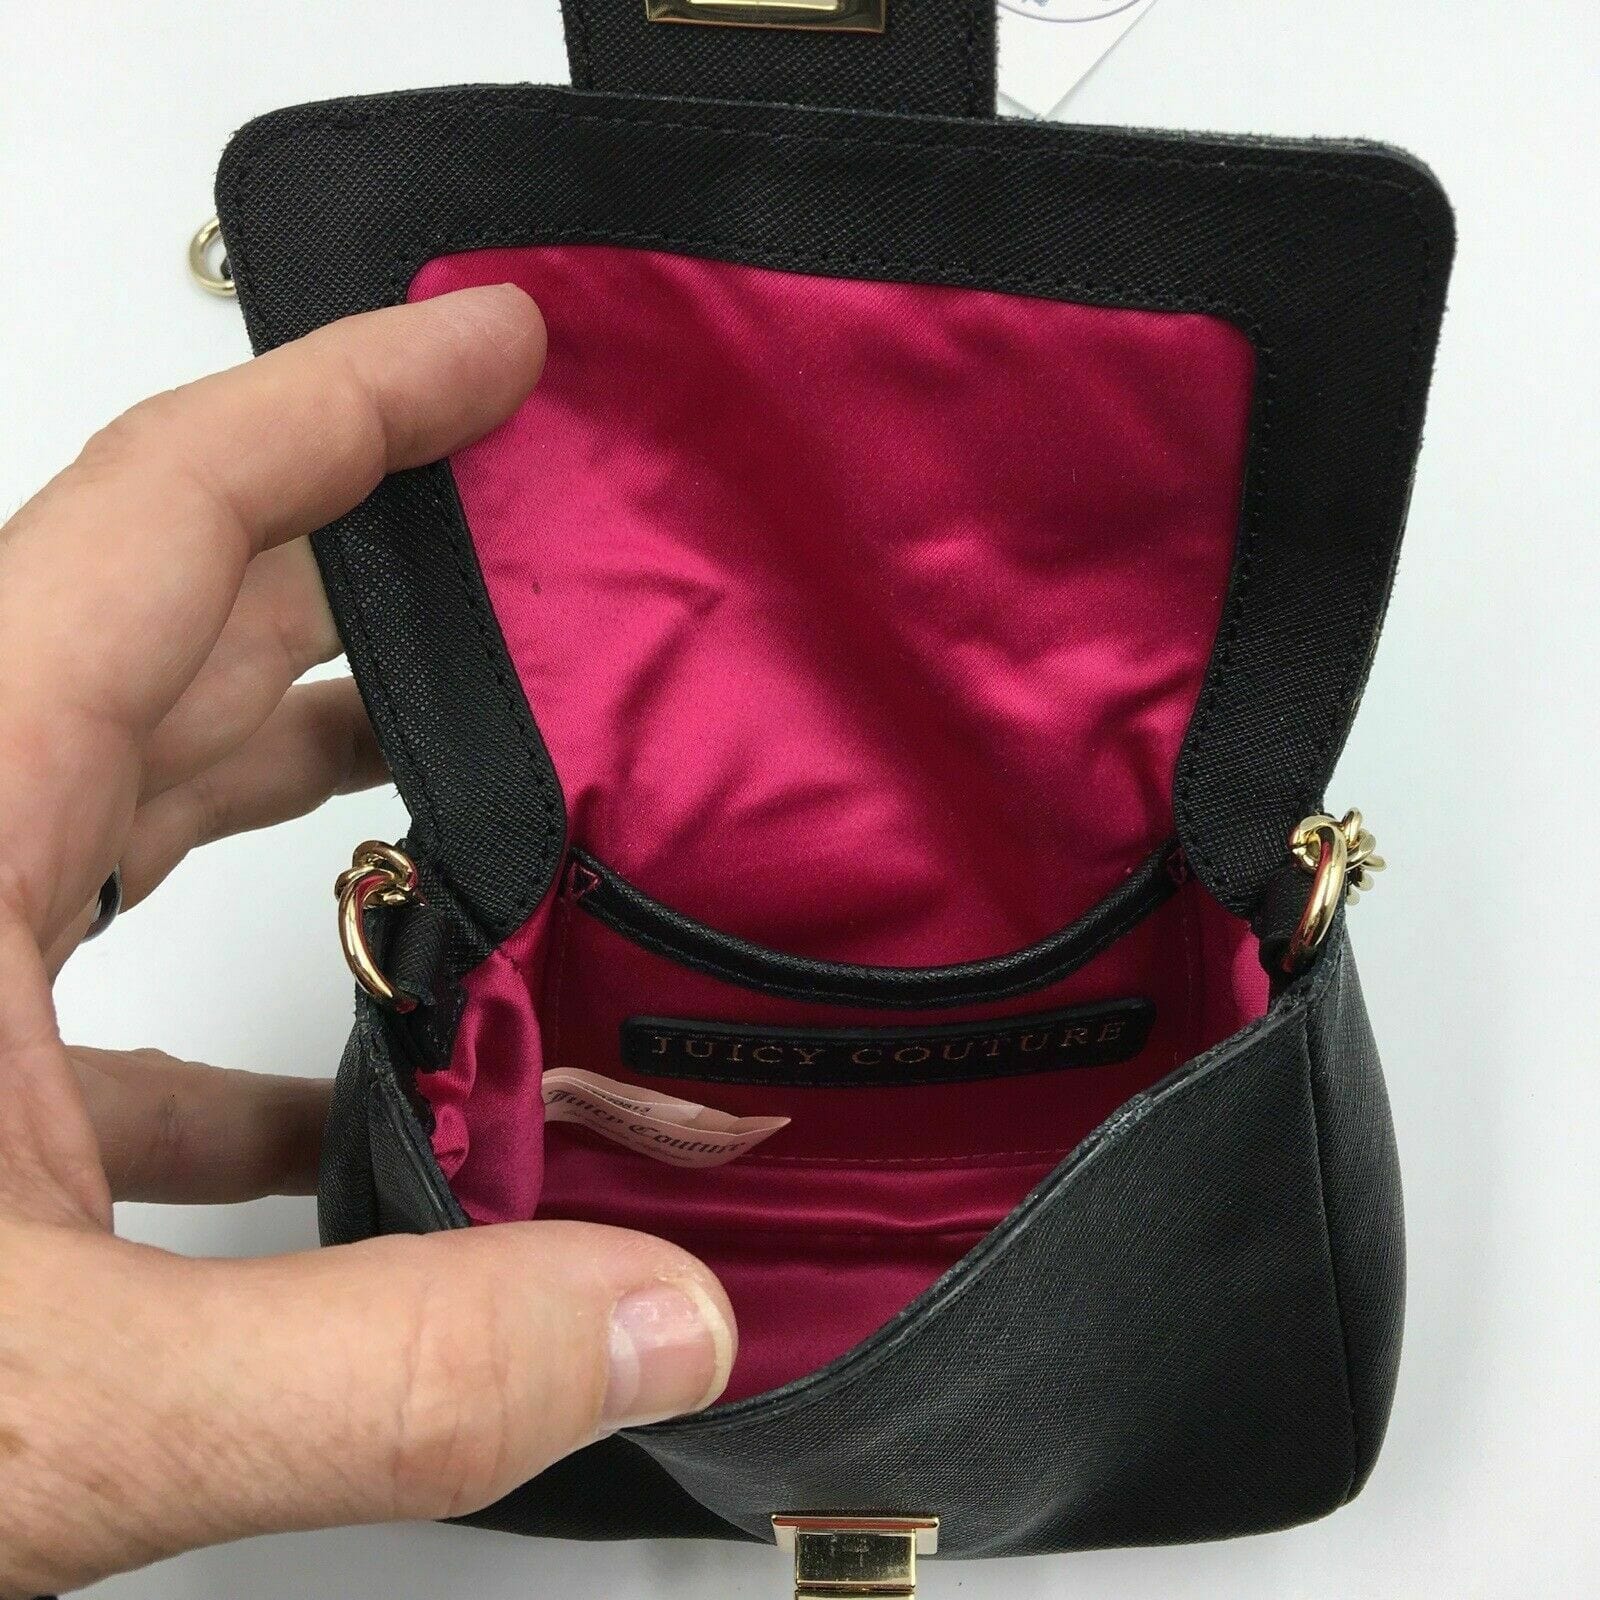 Juicy Couture Handbag Purse Black - $42 (65% Off Retail) - From Jess